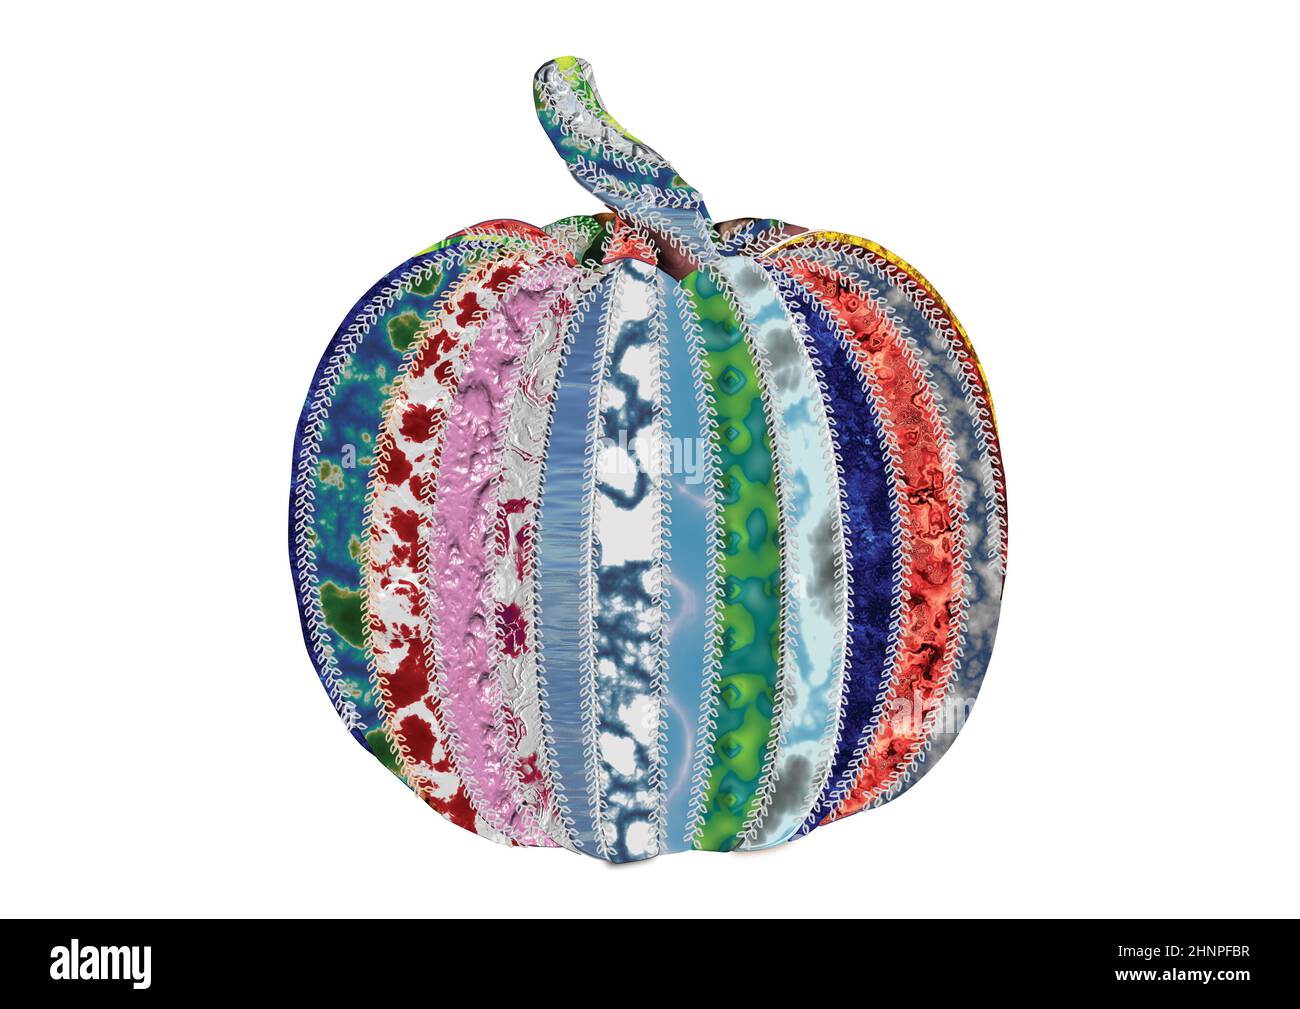 A drawing of a pumpkin decorated in a bohemian style with many colors and patterns of fabric stitched together Stock Photo